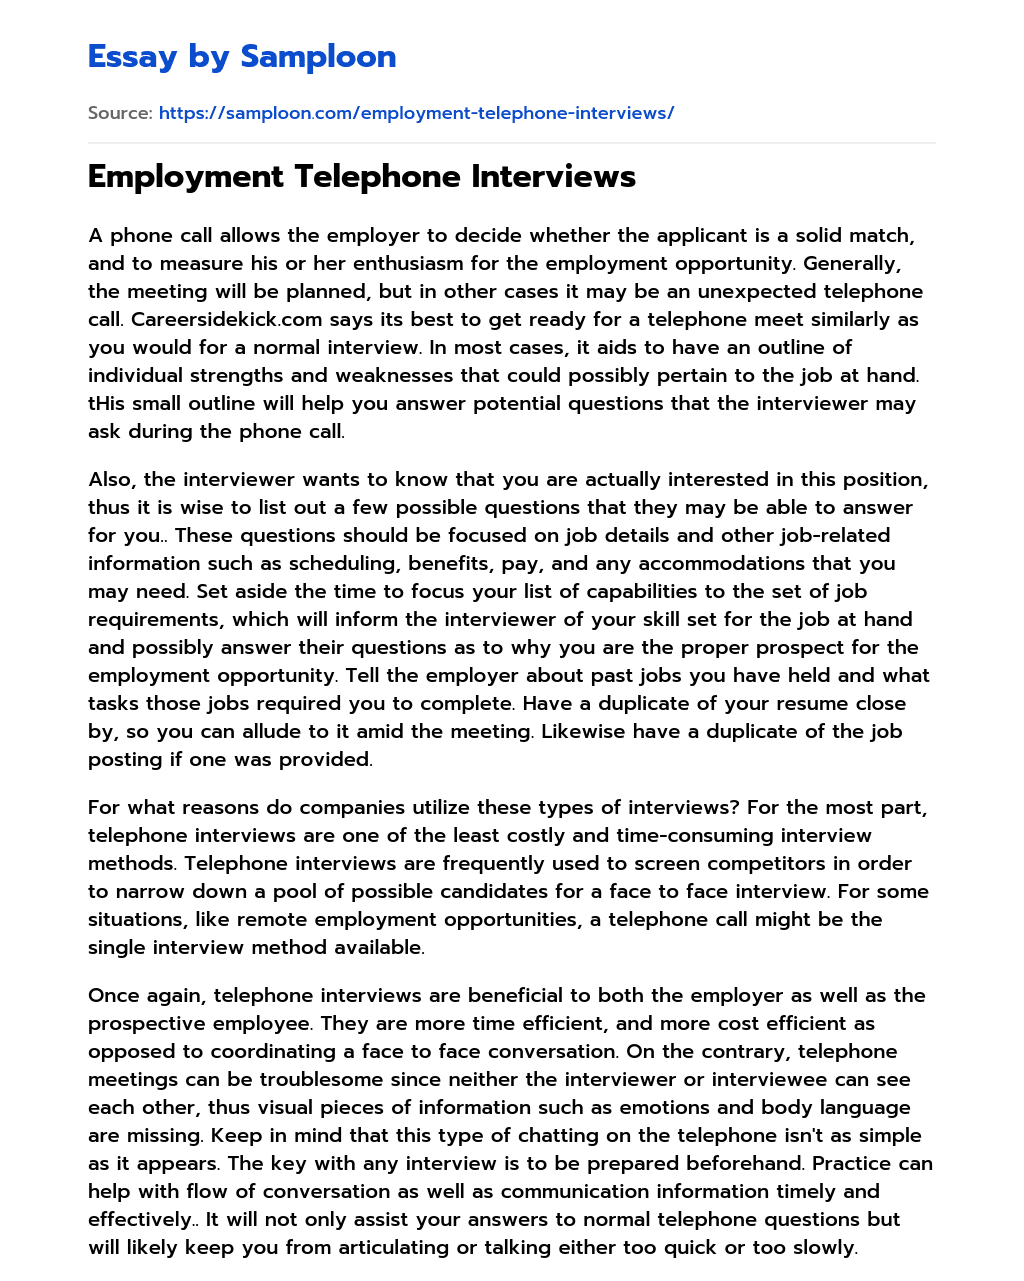 write an essay on tips for telephone interview